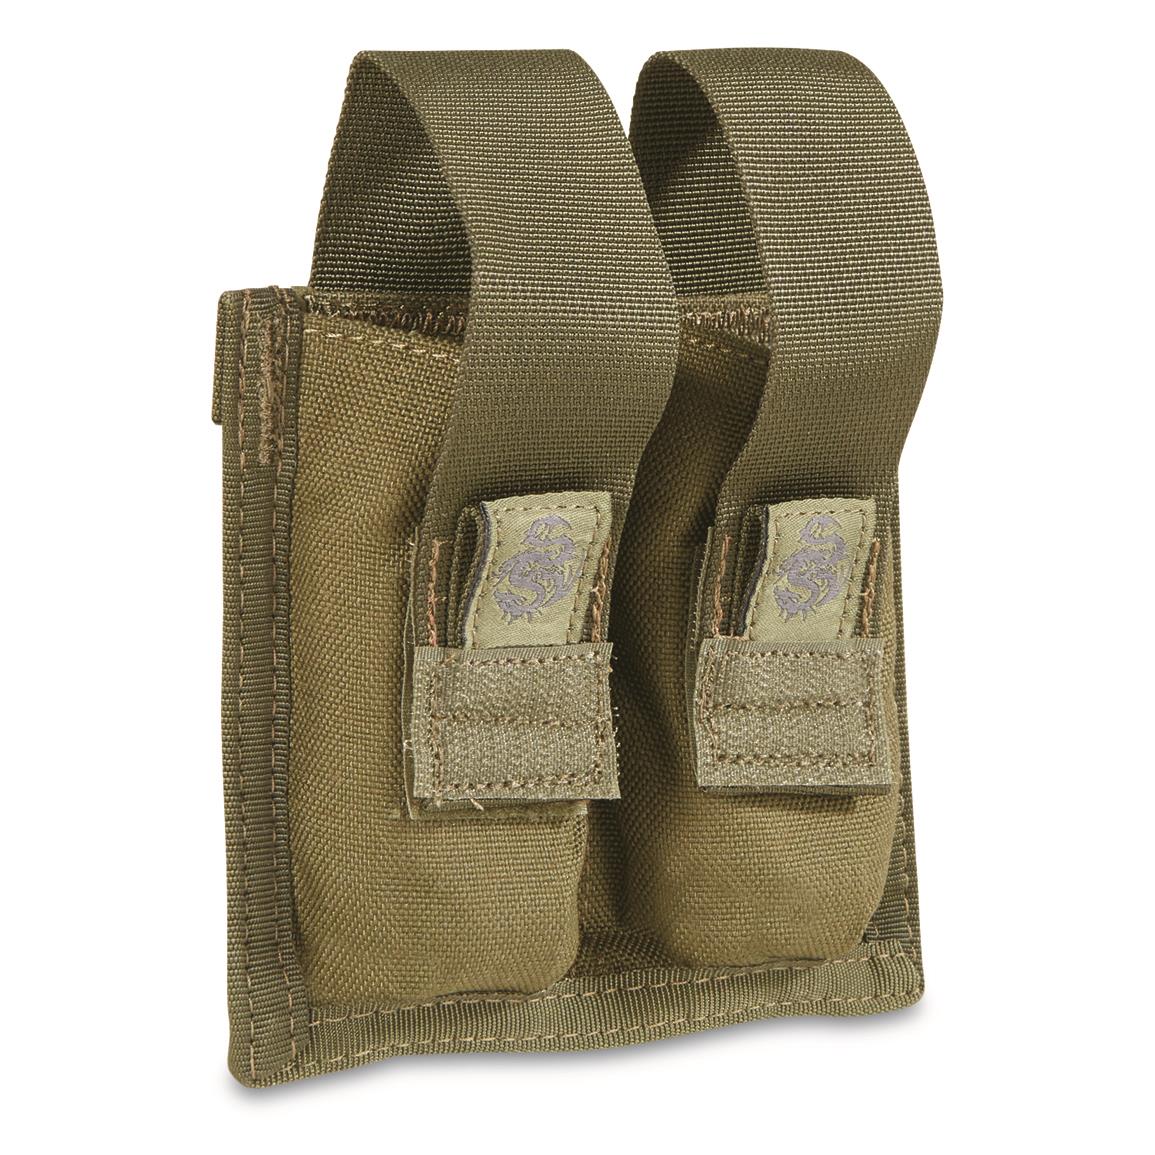 TacProGear Double Pistol Mag Pouch, Olive Drab